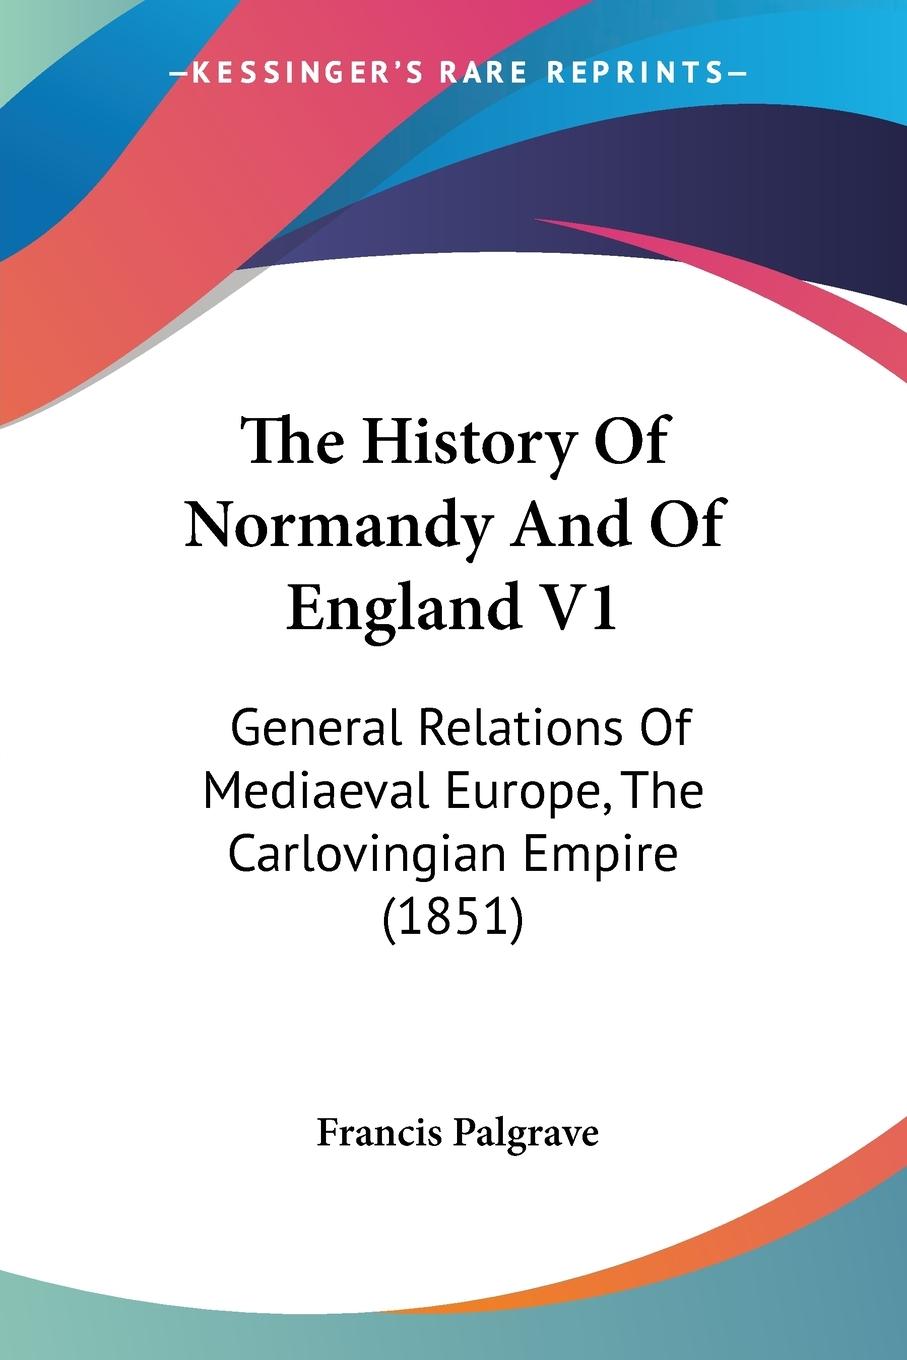 The History Of Normandy And Of England V1 - Palgrave, Francis